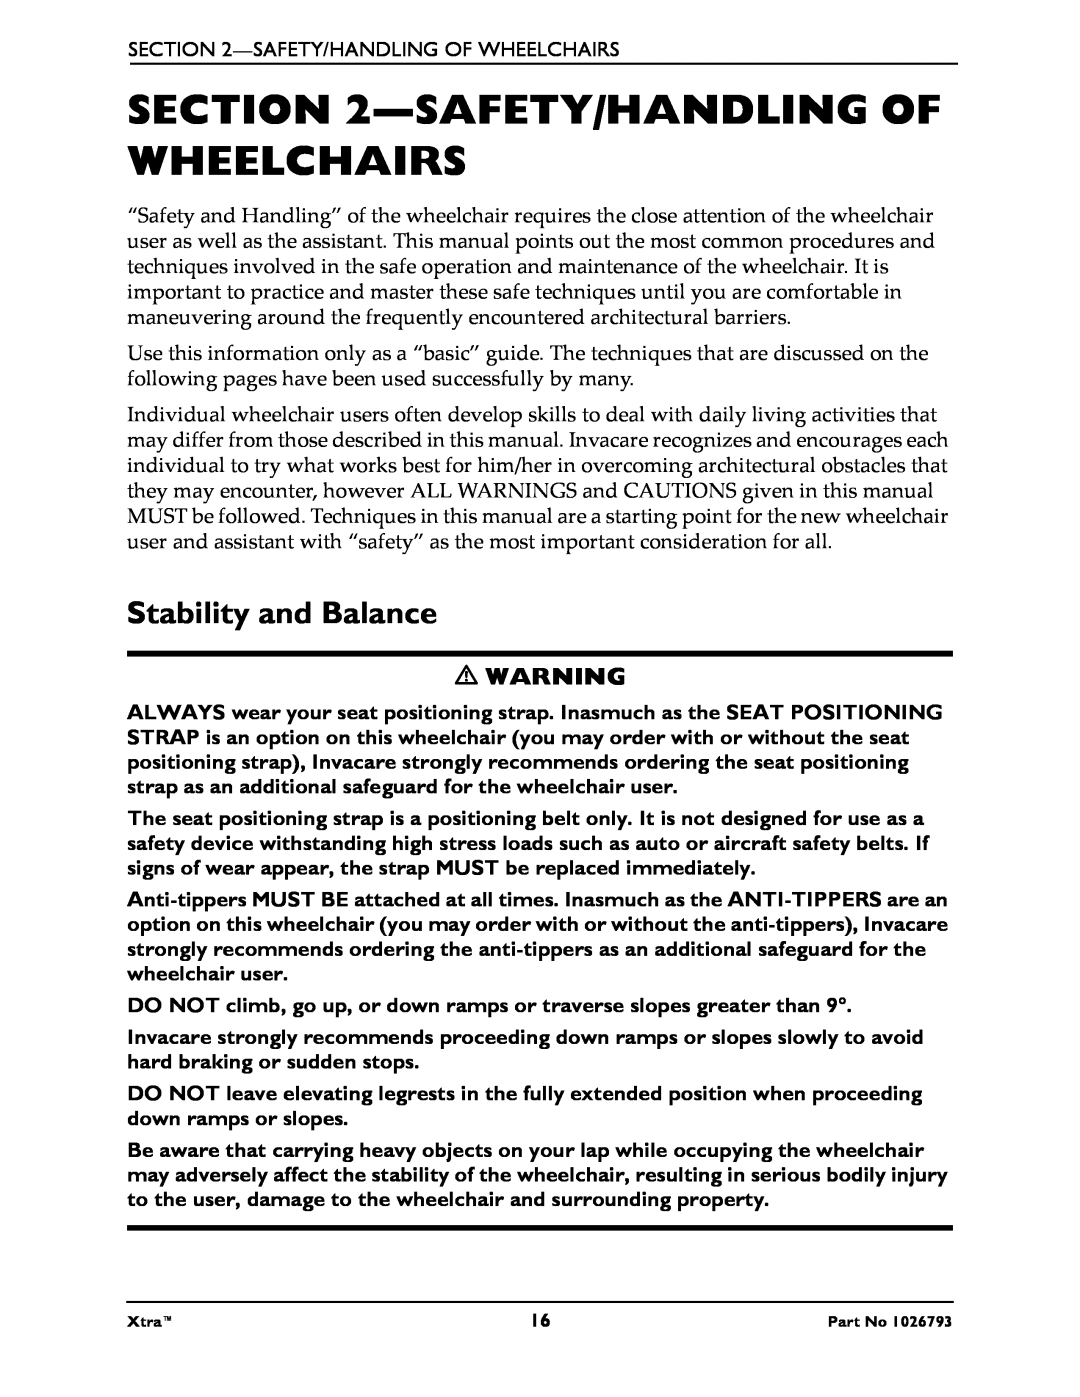 Invacare 1026793 manual Safety/Handling Of Wheelchairs, Stability and Balance 